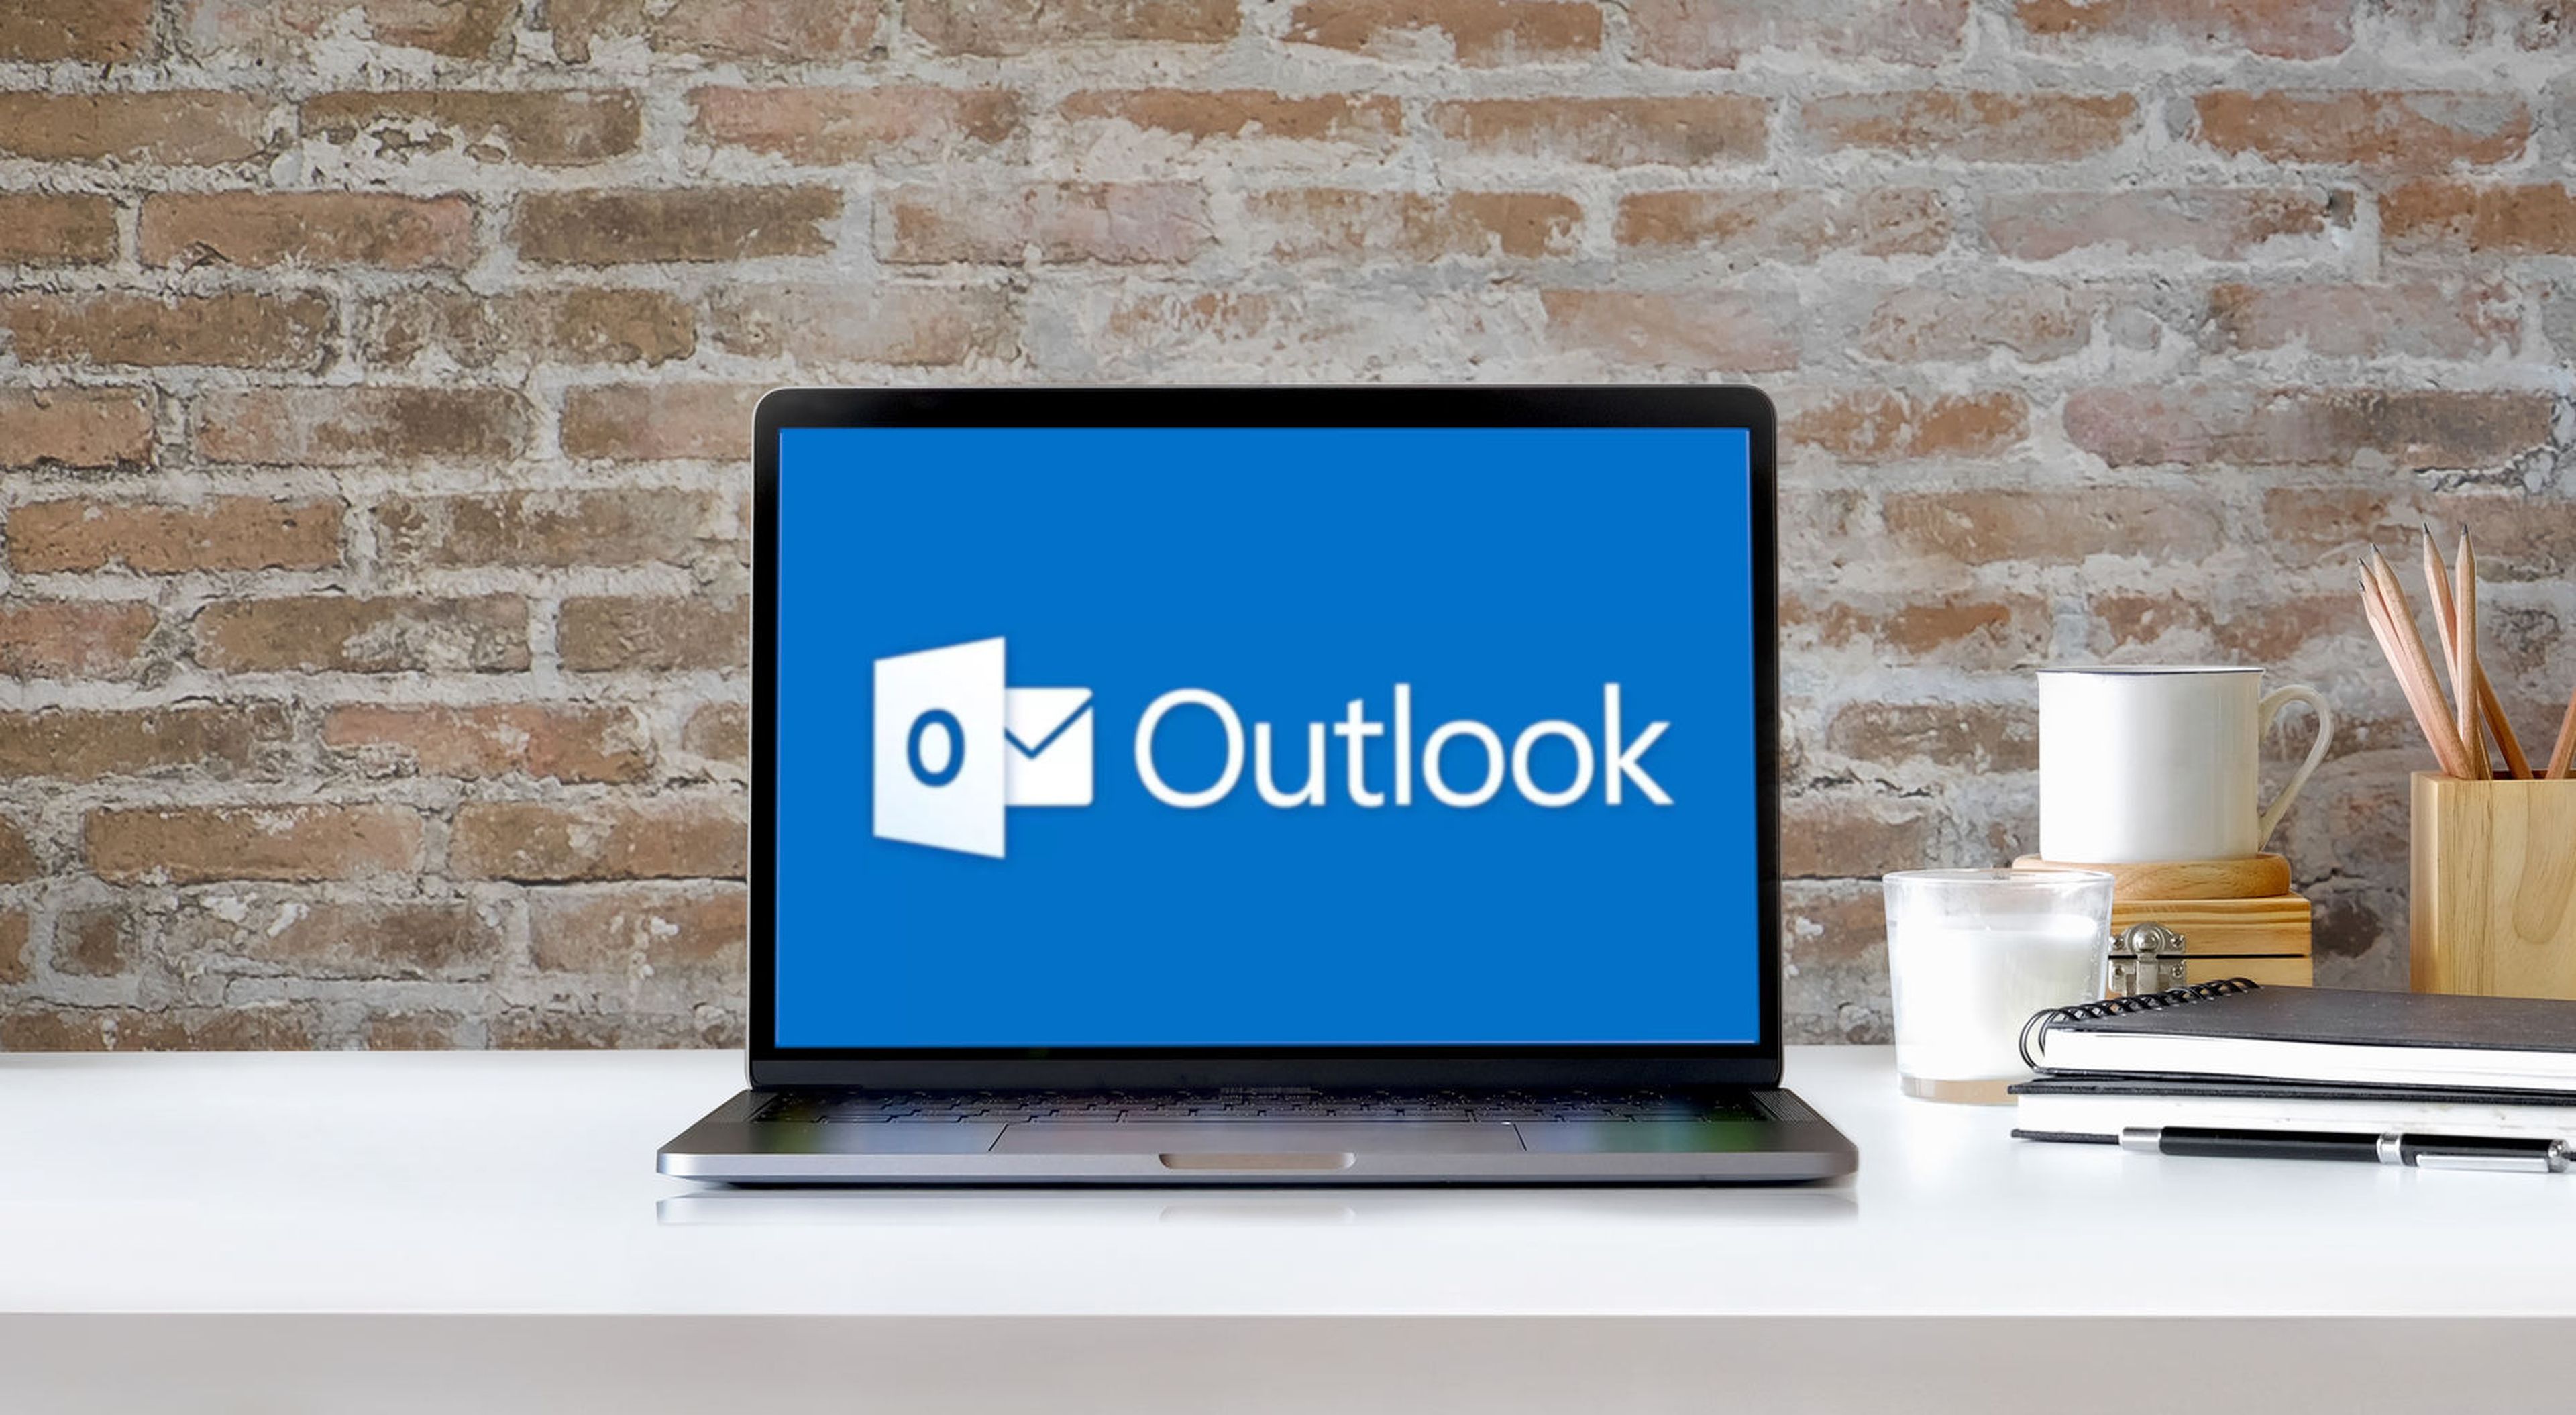 Outlook Hotmail